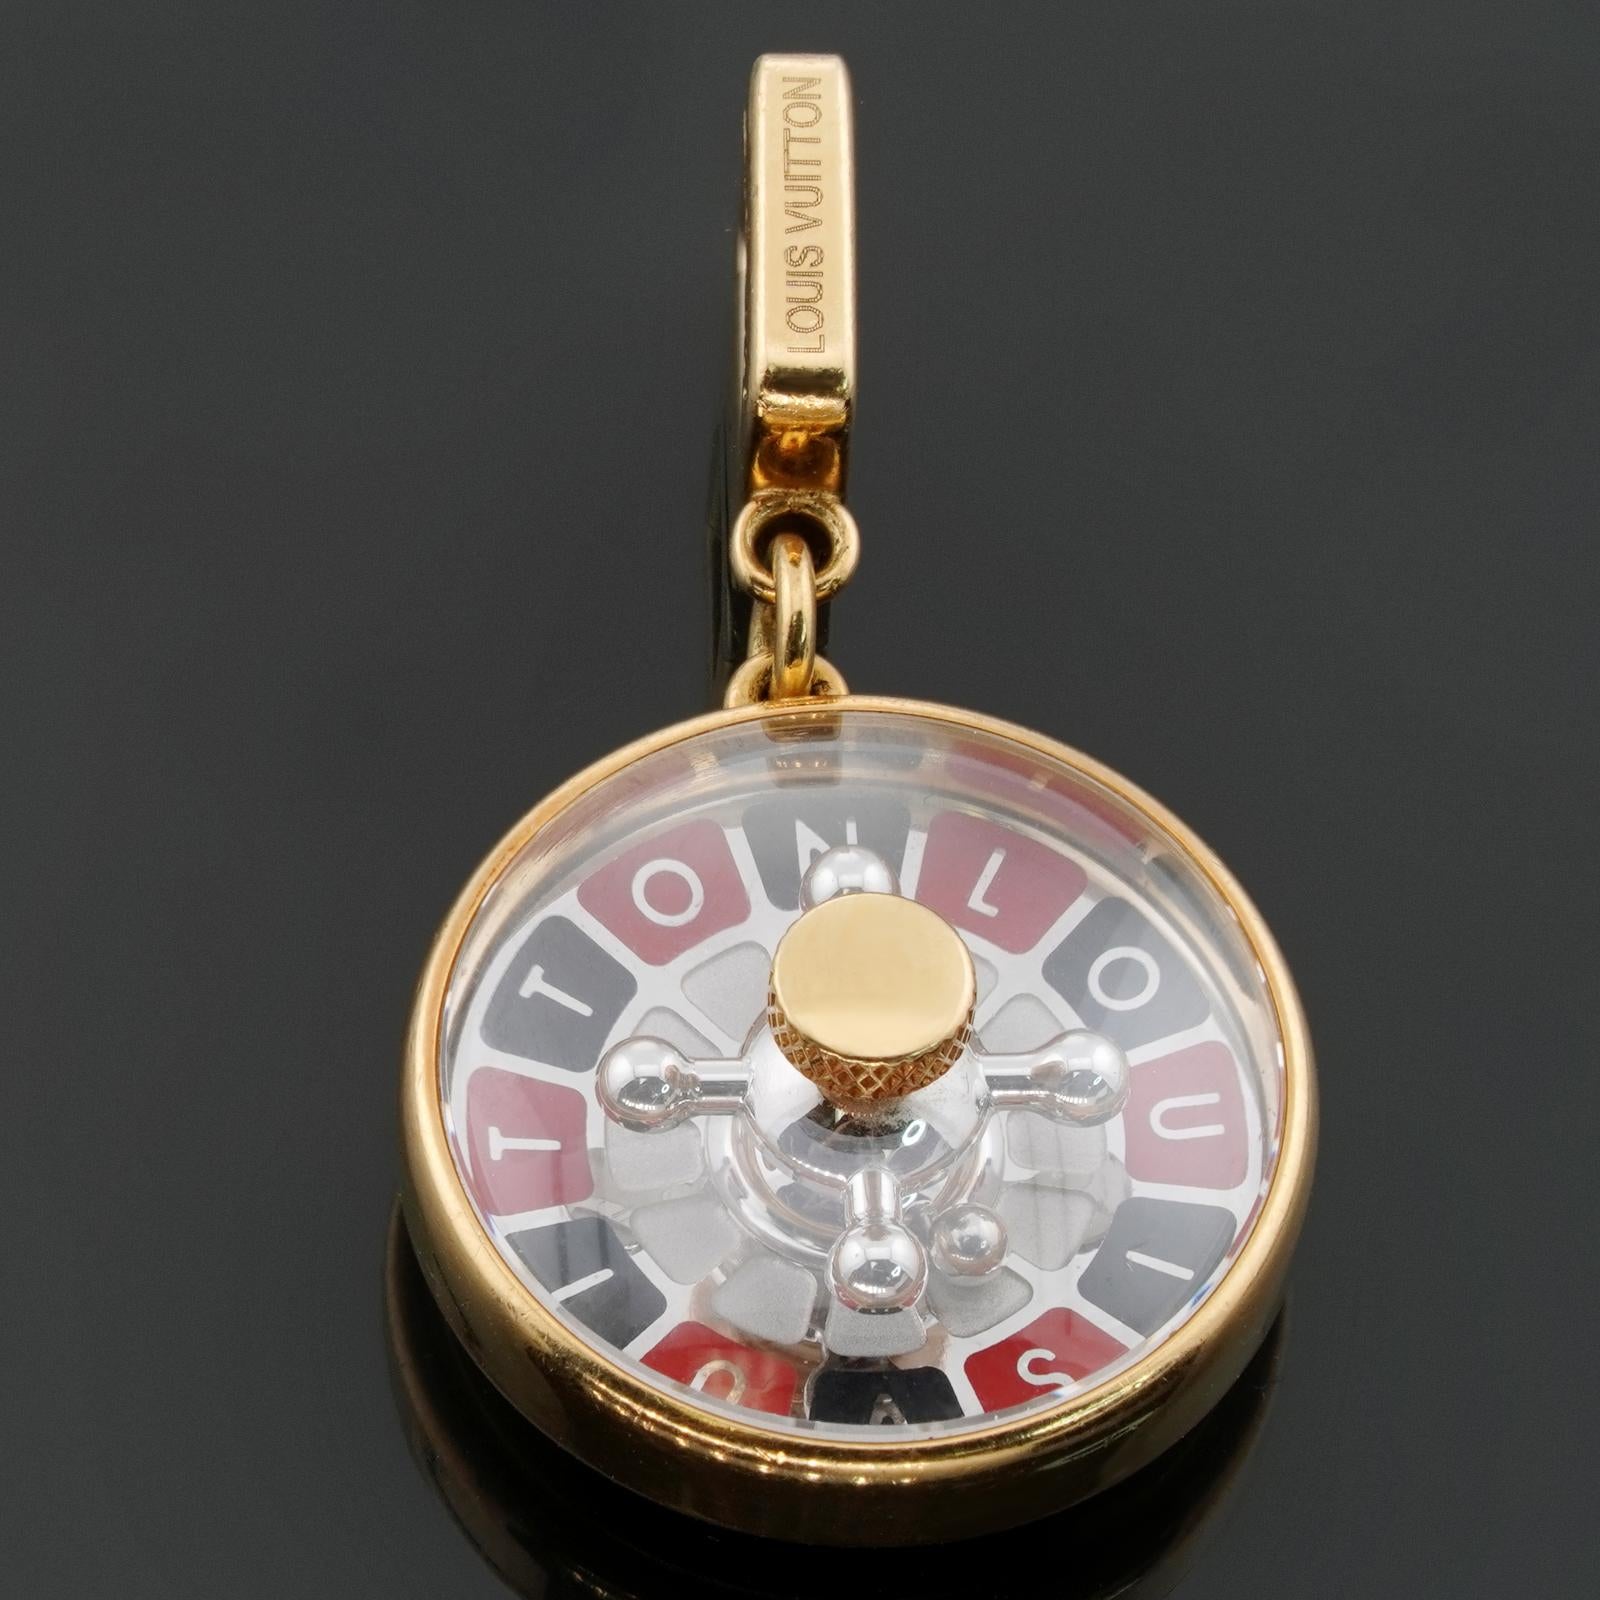 This gorgeous authentic Louis Vuitton charm features white gold a roulette game wheel set in a round yellow gold frame enclosed with a sapphire crystal cover. The back us completed with a Good Luck engraving.  Made in France circa 2010s.